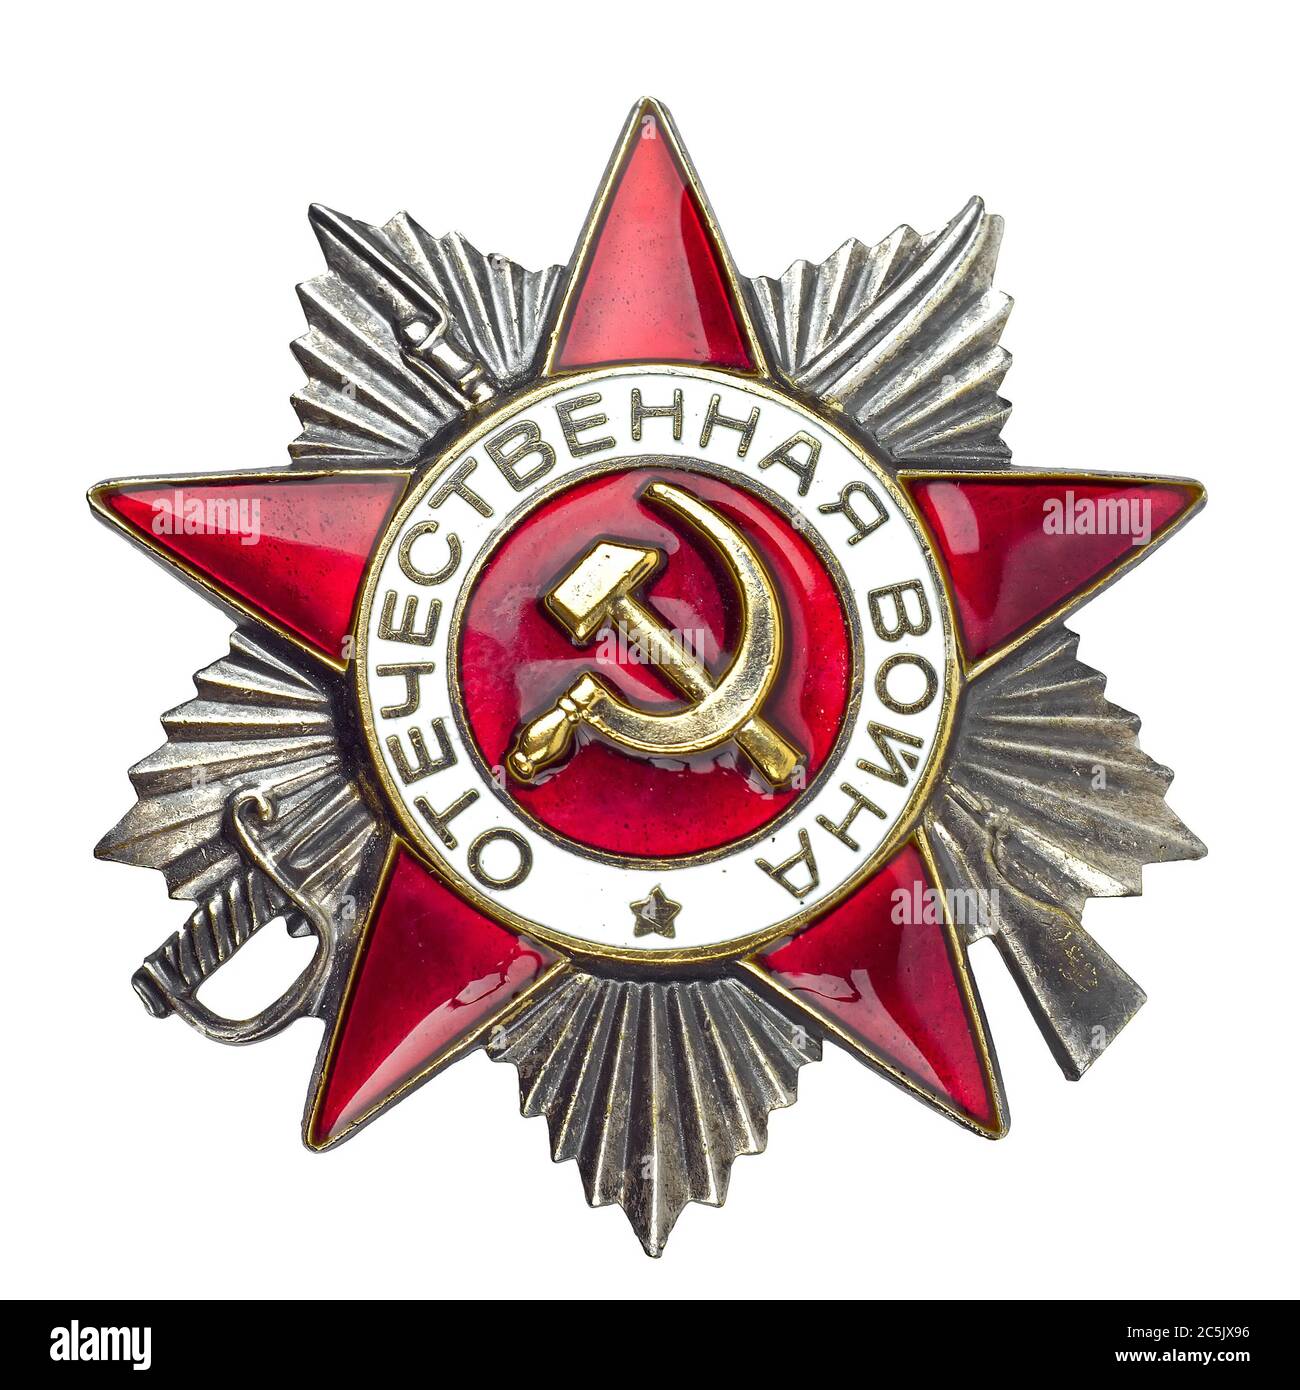 Soviet Order of the Great Patriotic War. Symbol of Russia's victory in World War II. Isolated on white. Stock Photo